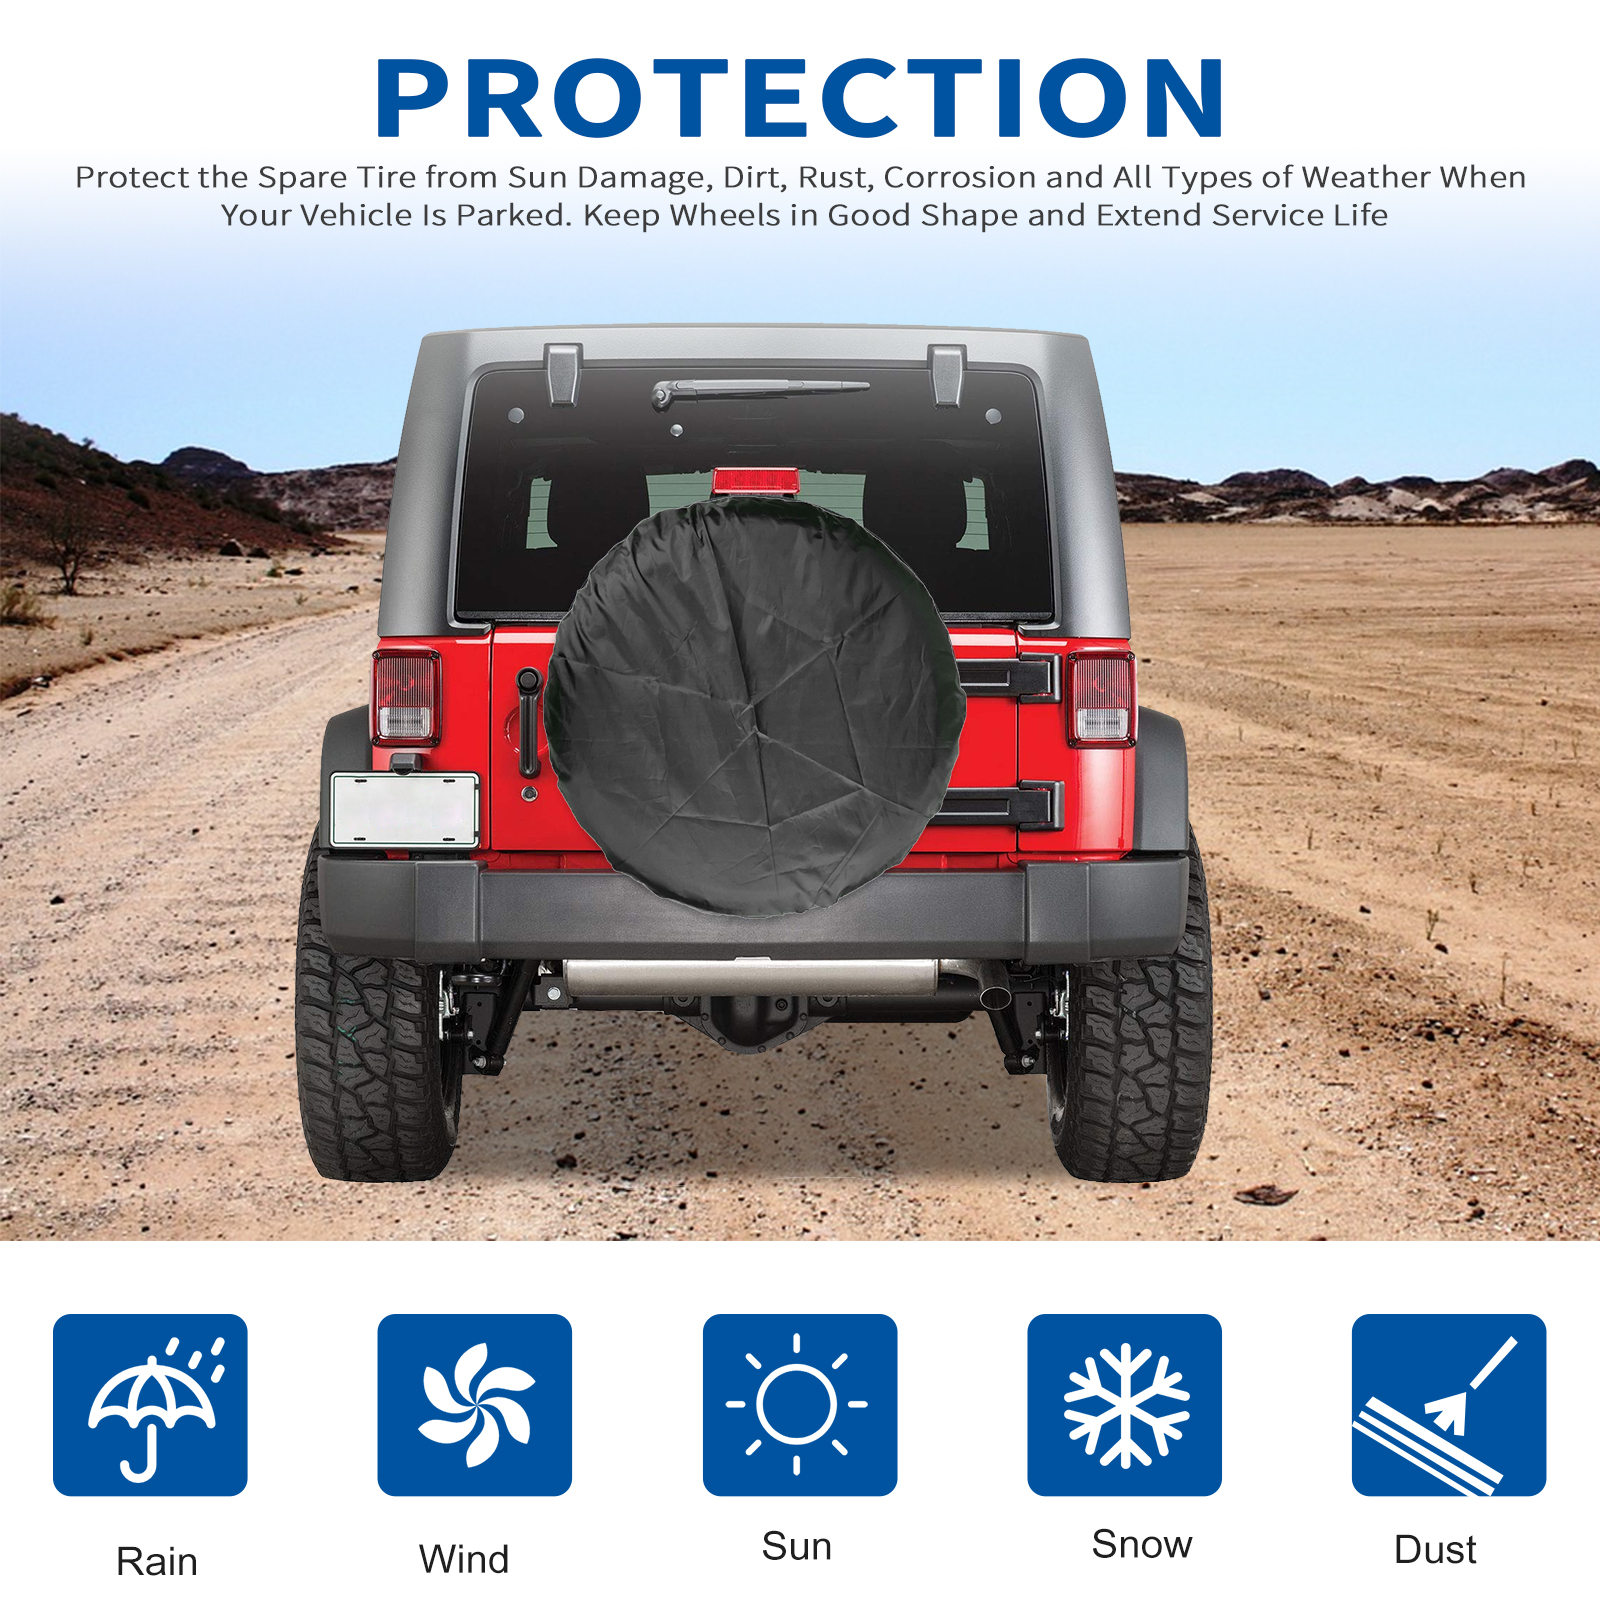 18.5-31.5inch Spare Tire Cover, EEEkit Tough Tire Wheel Soft Cover for  18.5-31.5inch Entire Wheel Size, Black Wheel Cover Fit for Jeep, Trailer, RV,  SUV, Truck